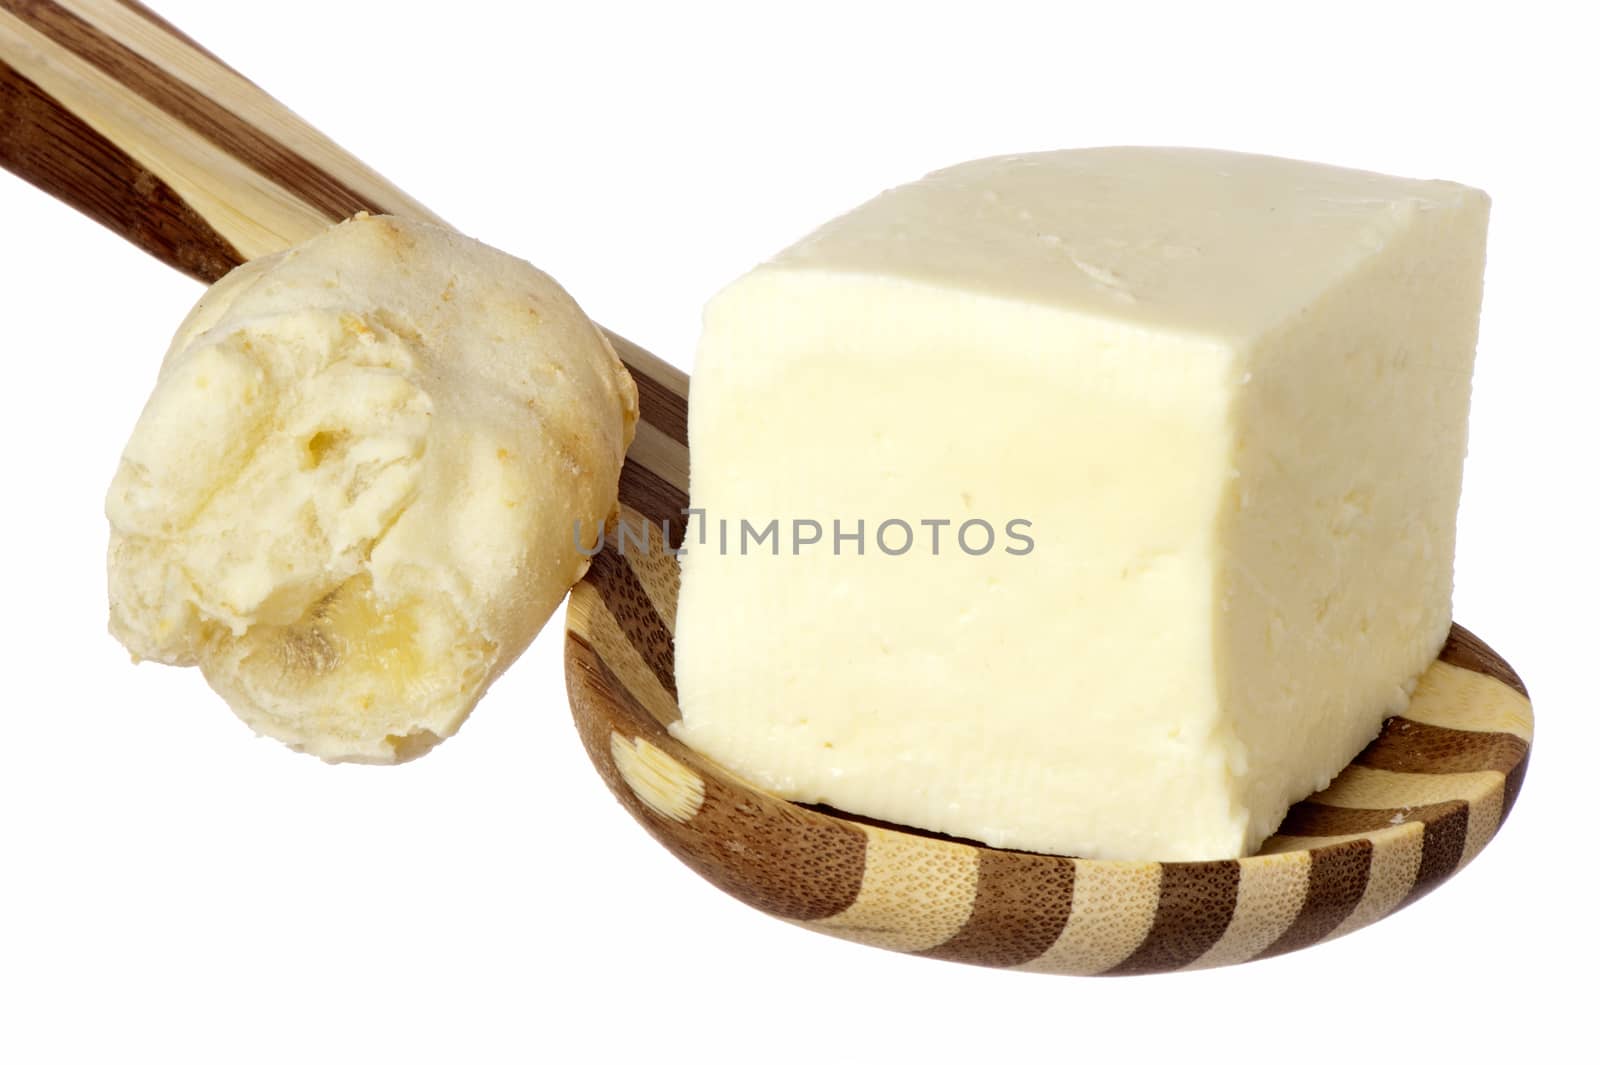 yuccas and yucca bread on white background